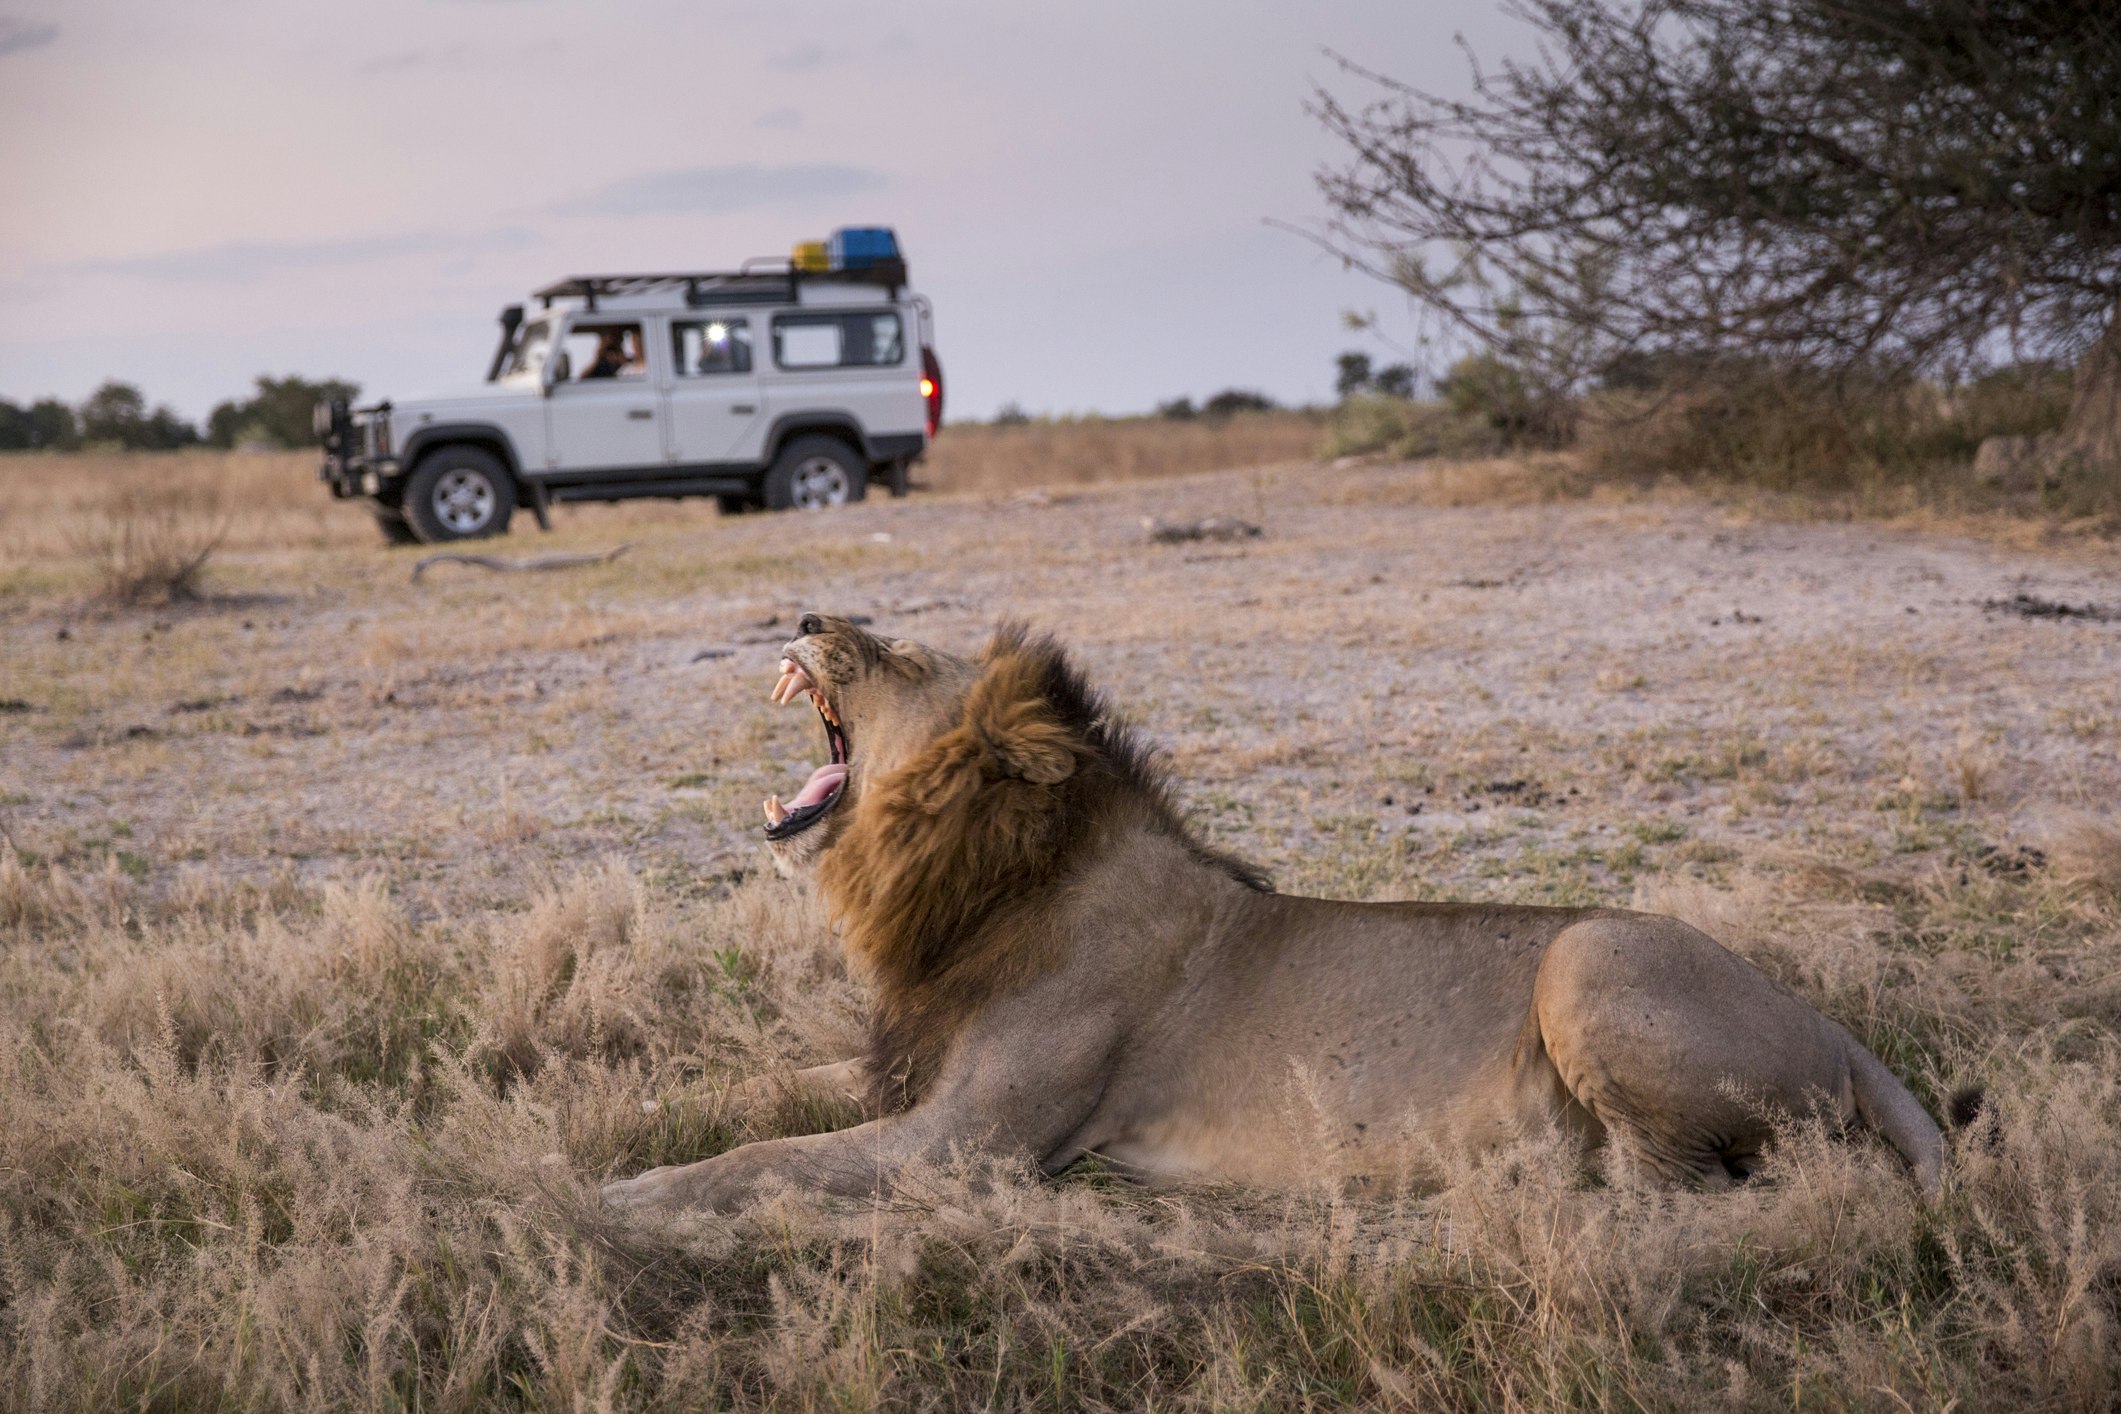 Tourists in a safari truck watch a male lion yawn at dusk at Moremi Game Reserve, Botswana, Africa